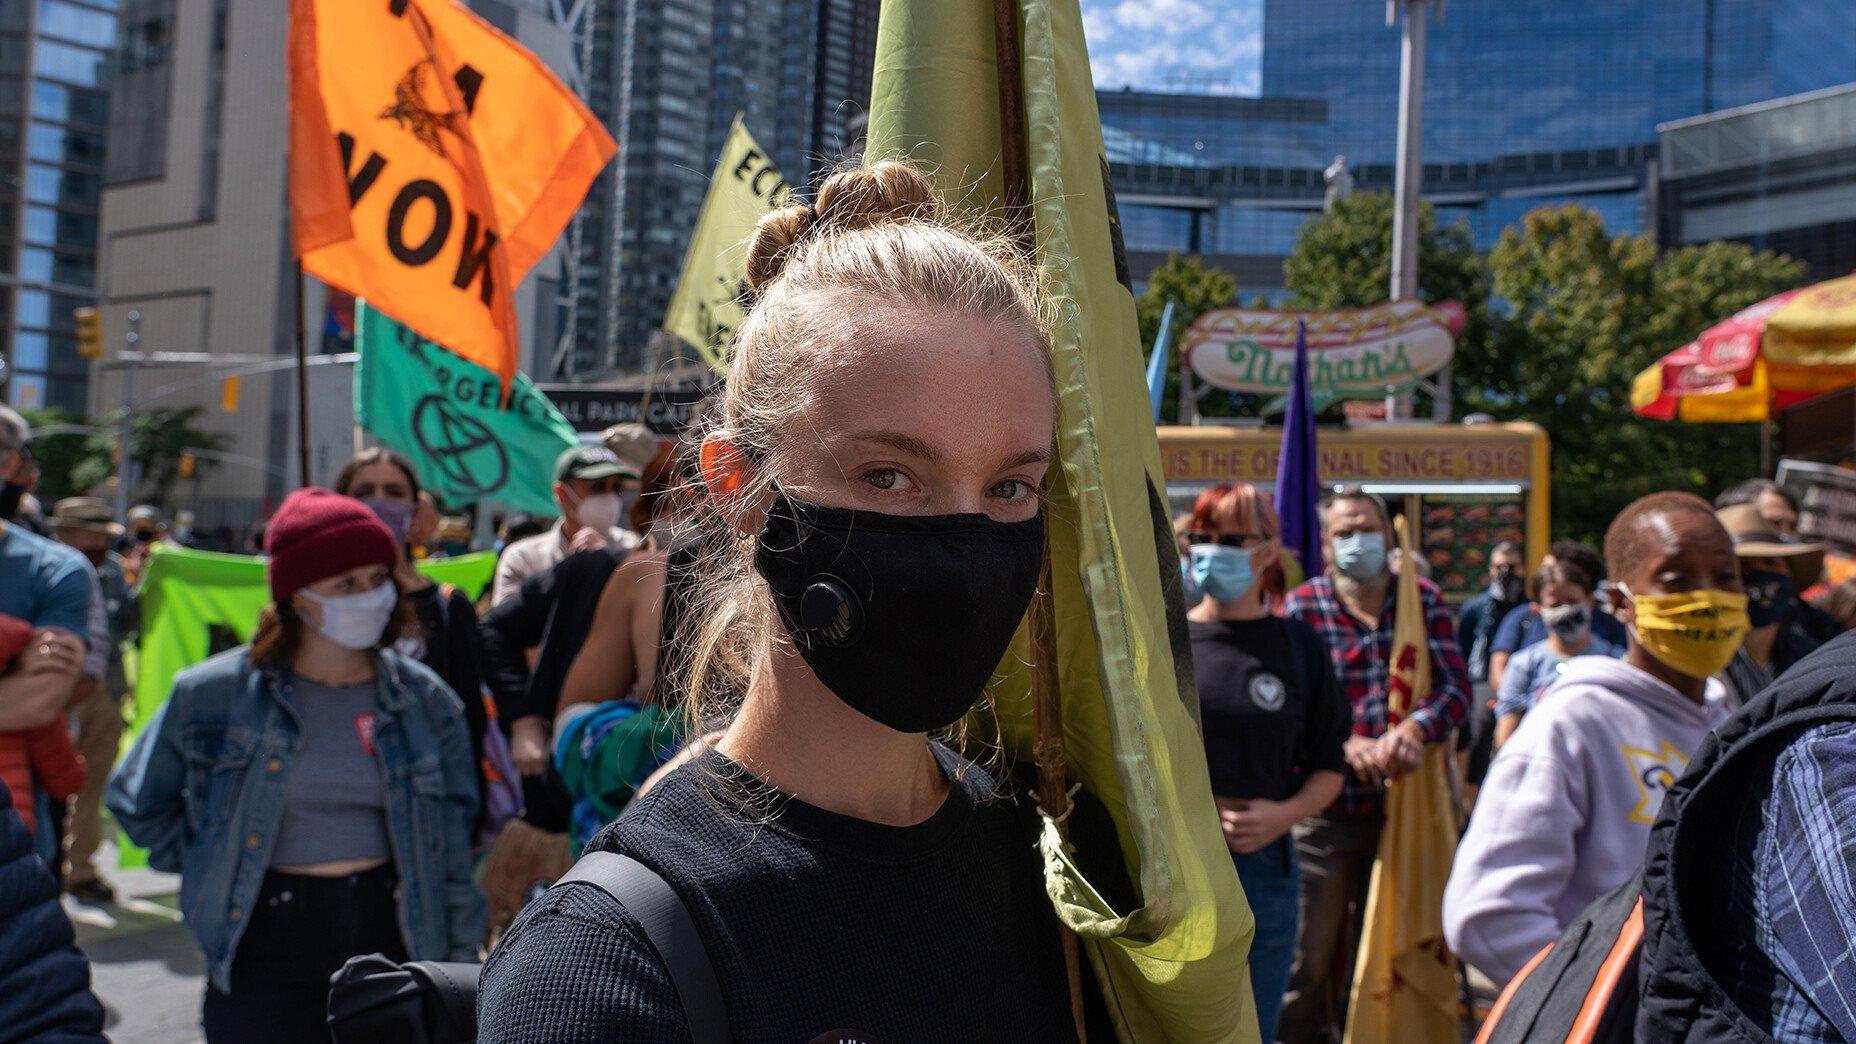 A young girl wearing a mask holds a flag during a climate march.